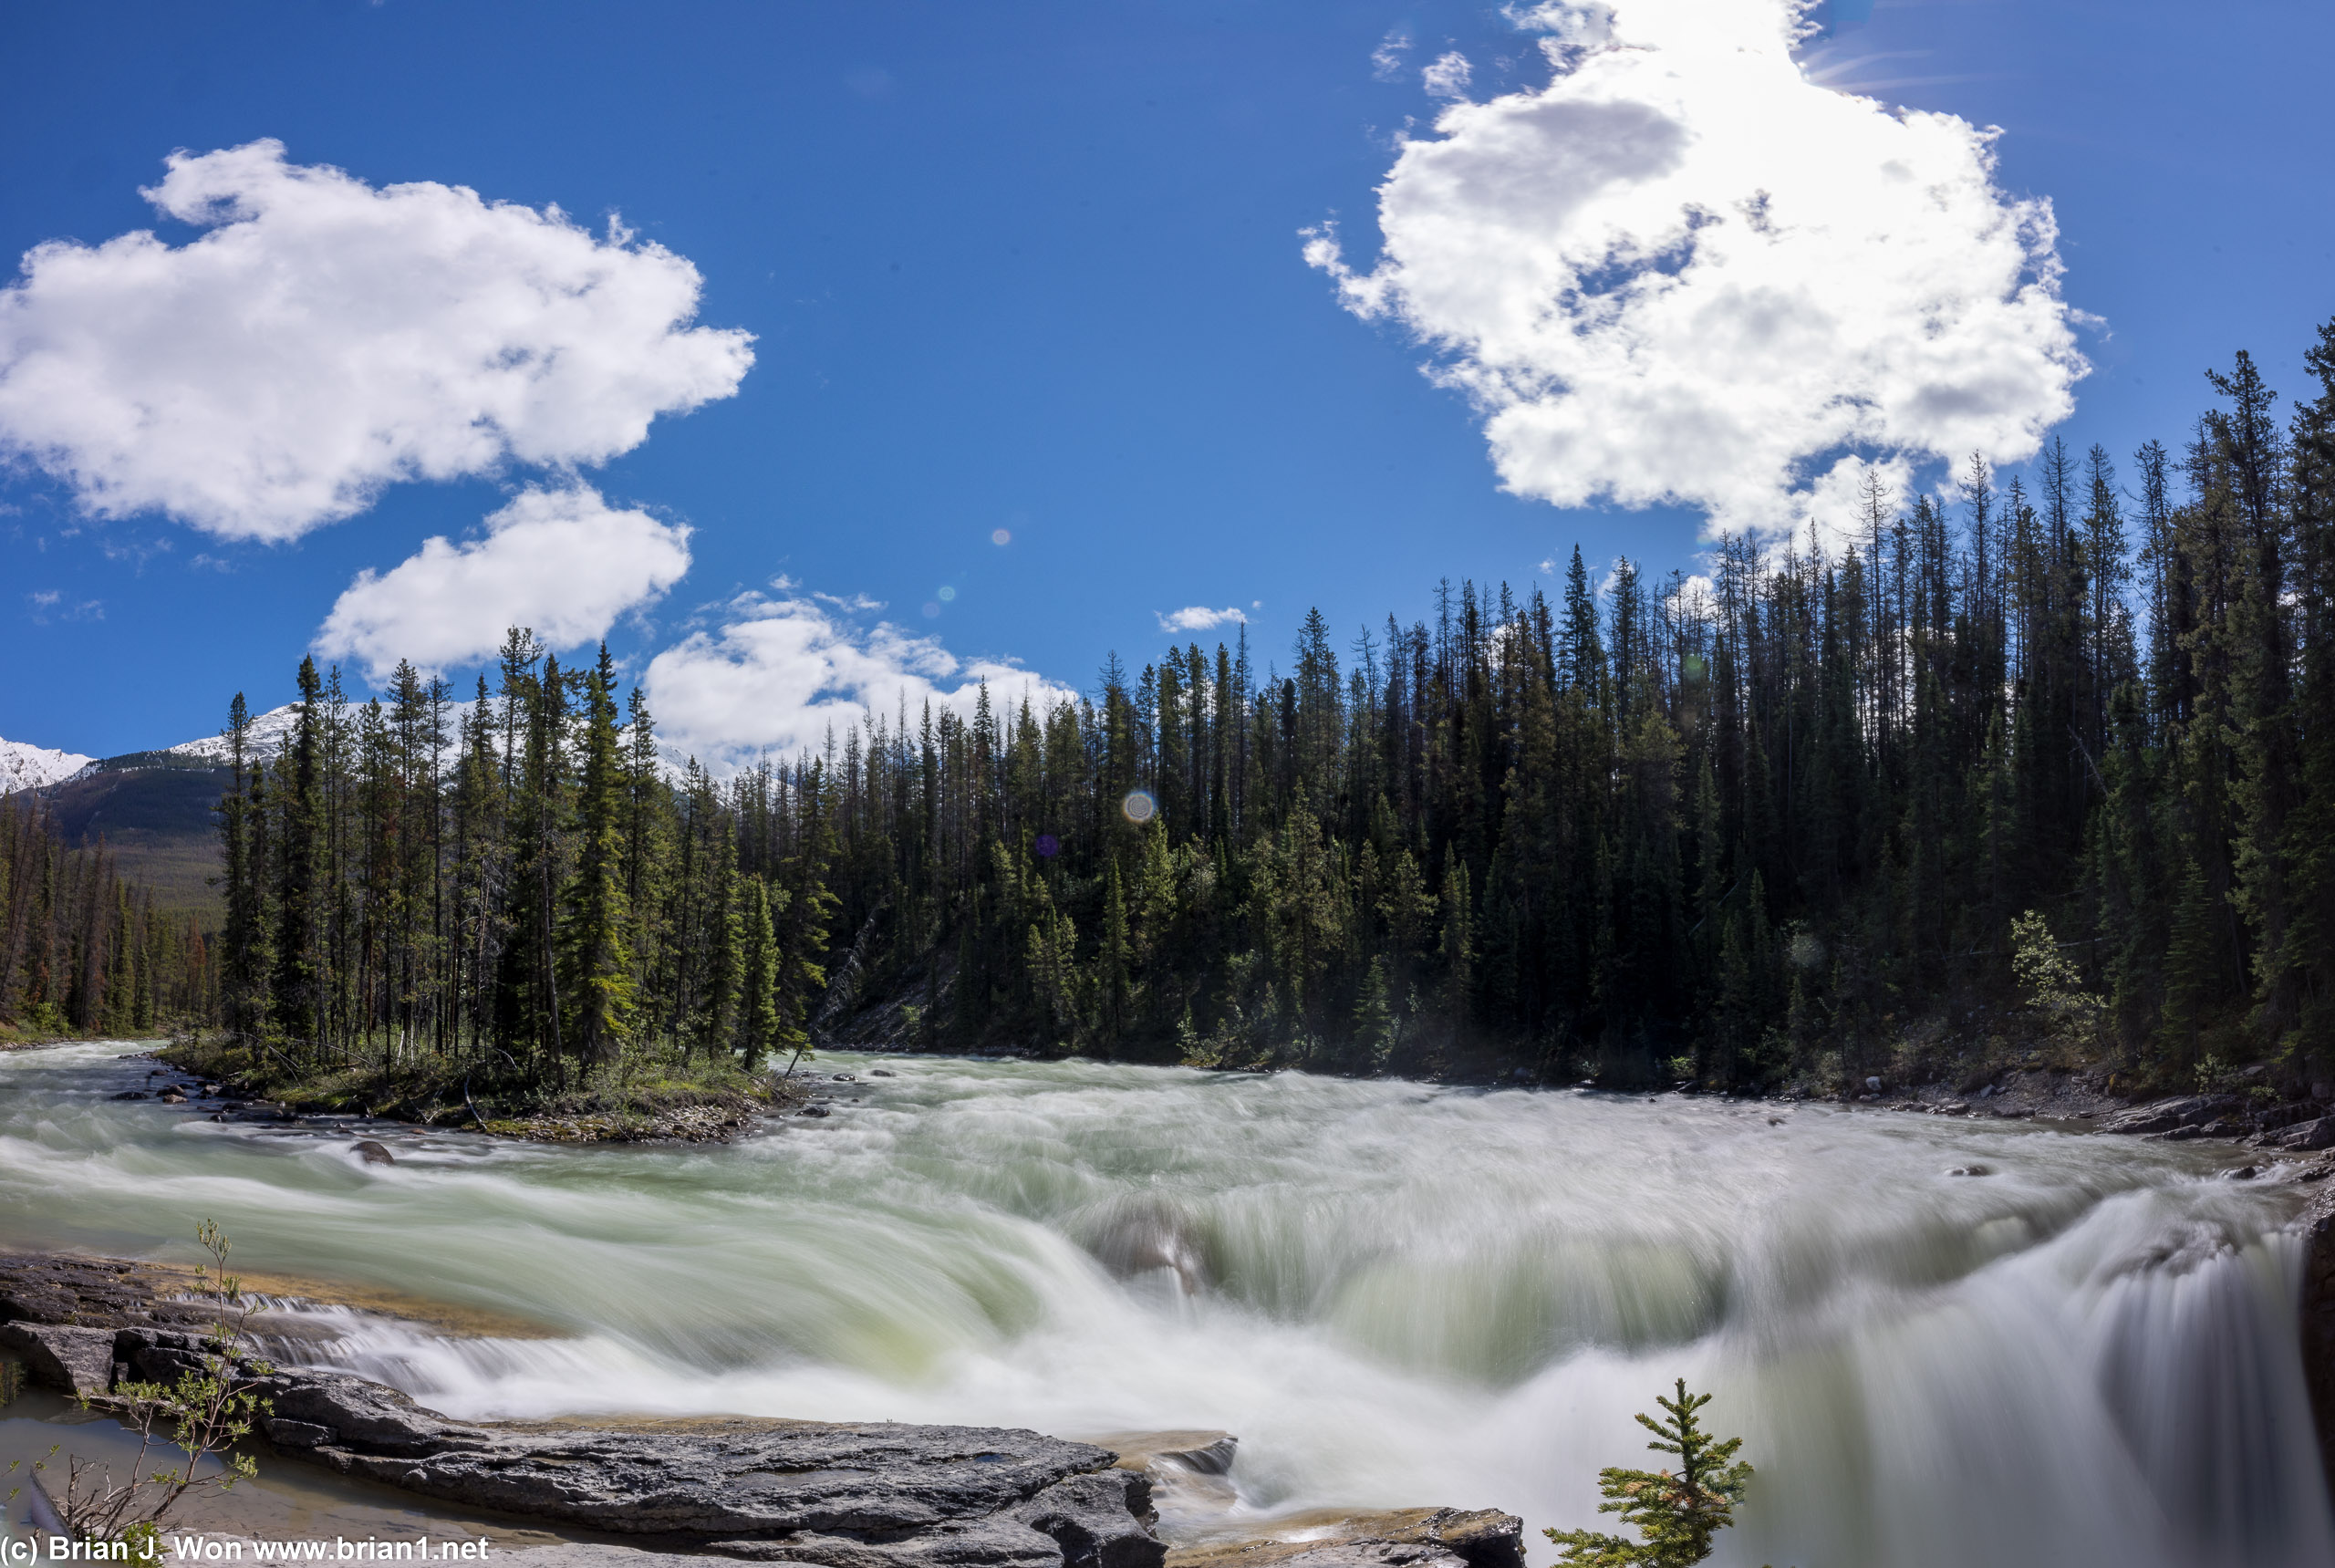 The left-side viewing point of Sunwapta Falls.